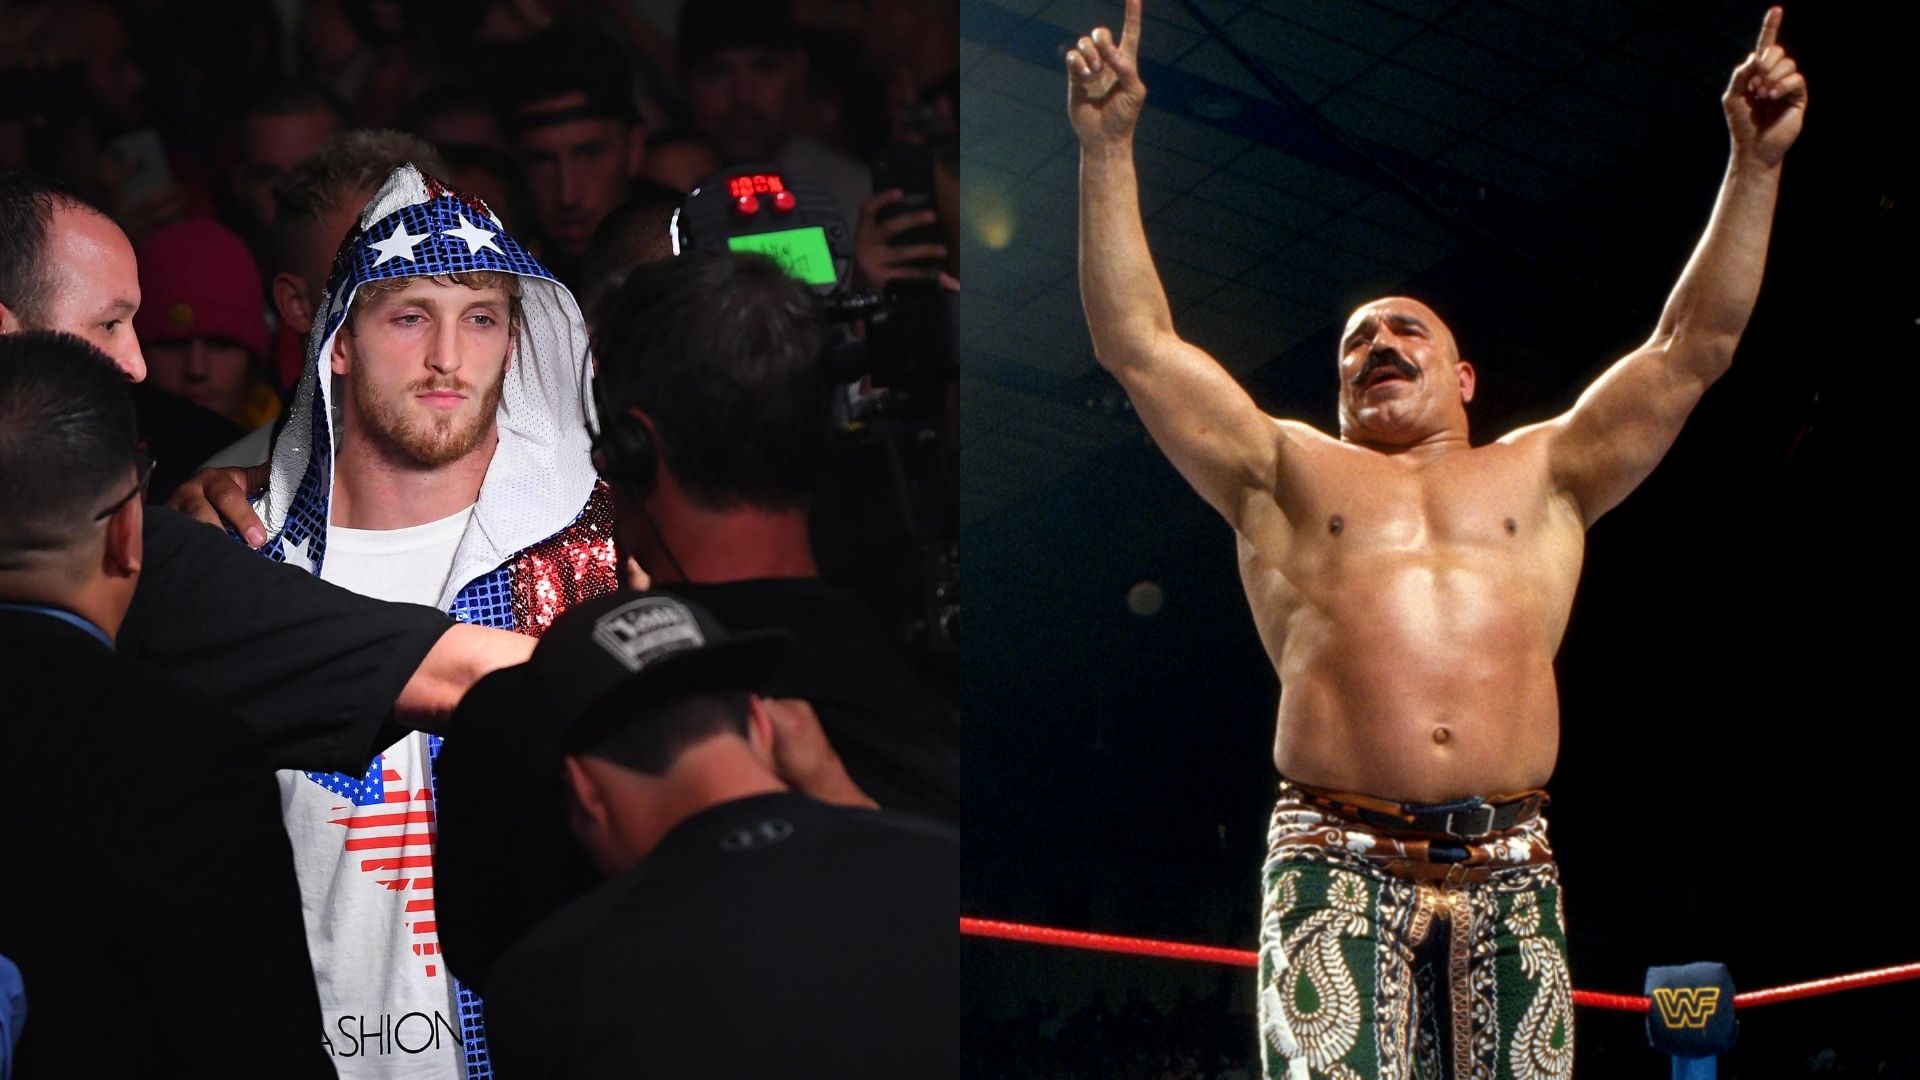 The Iron Sheik called out Logan Paul after his $10,000 wrestling match challenge